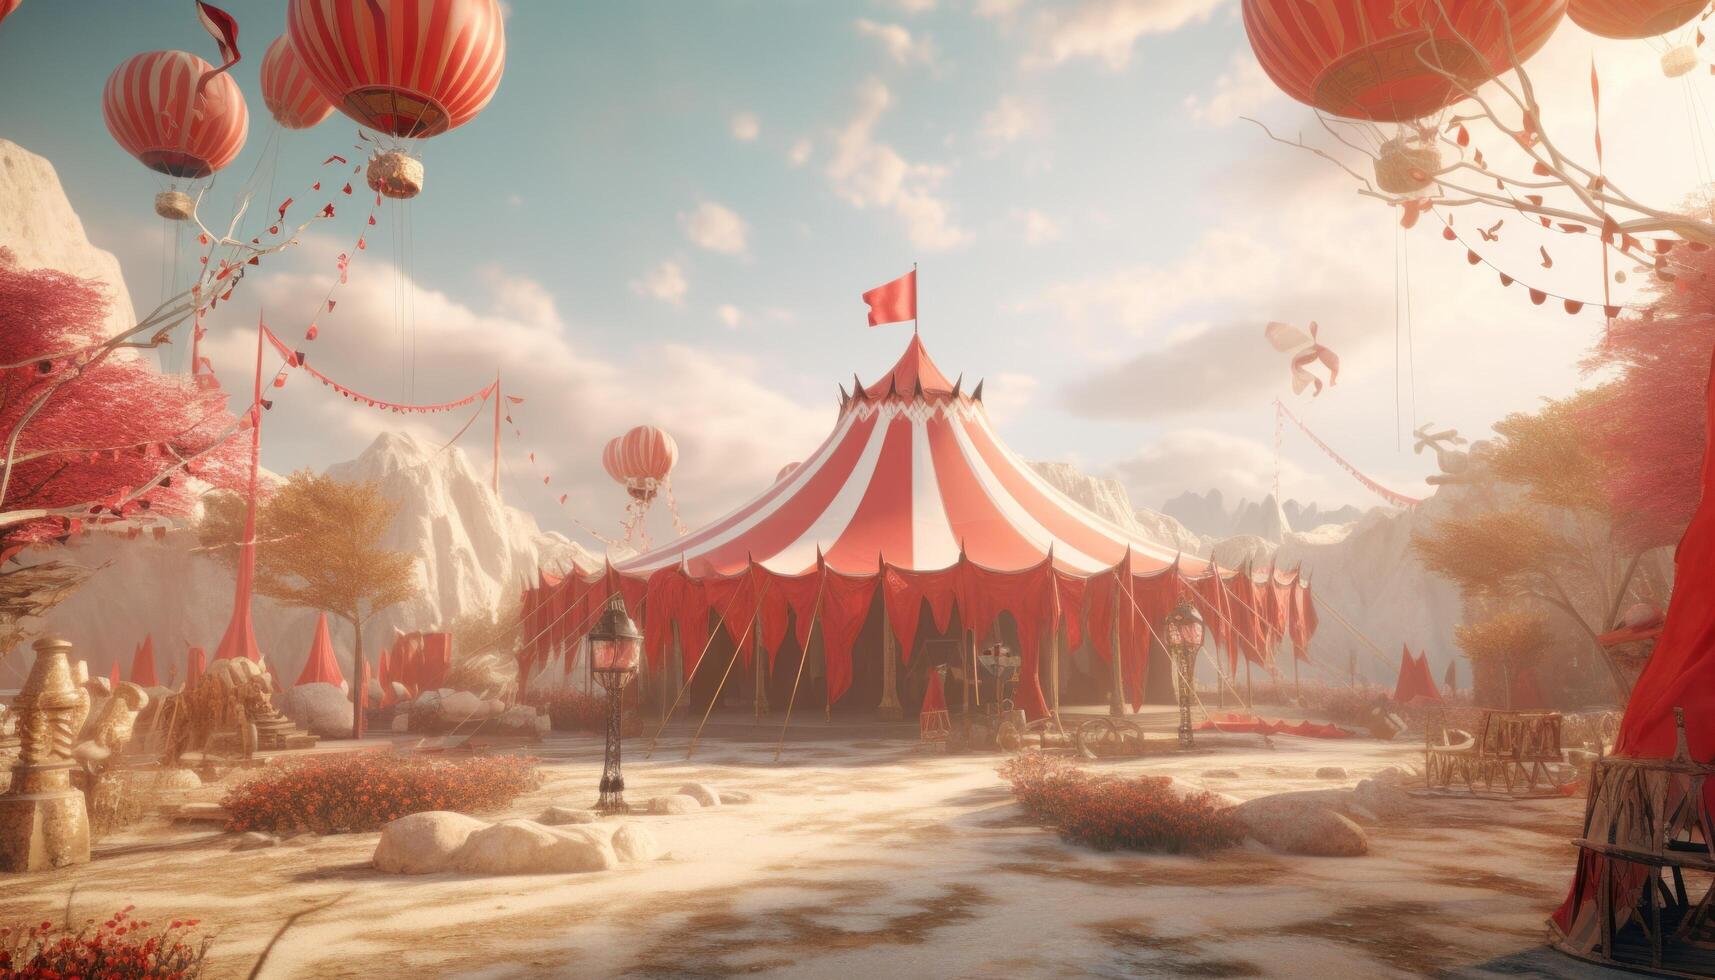 AI generated a red circus tent near some balloons. photo